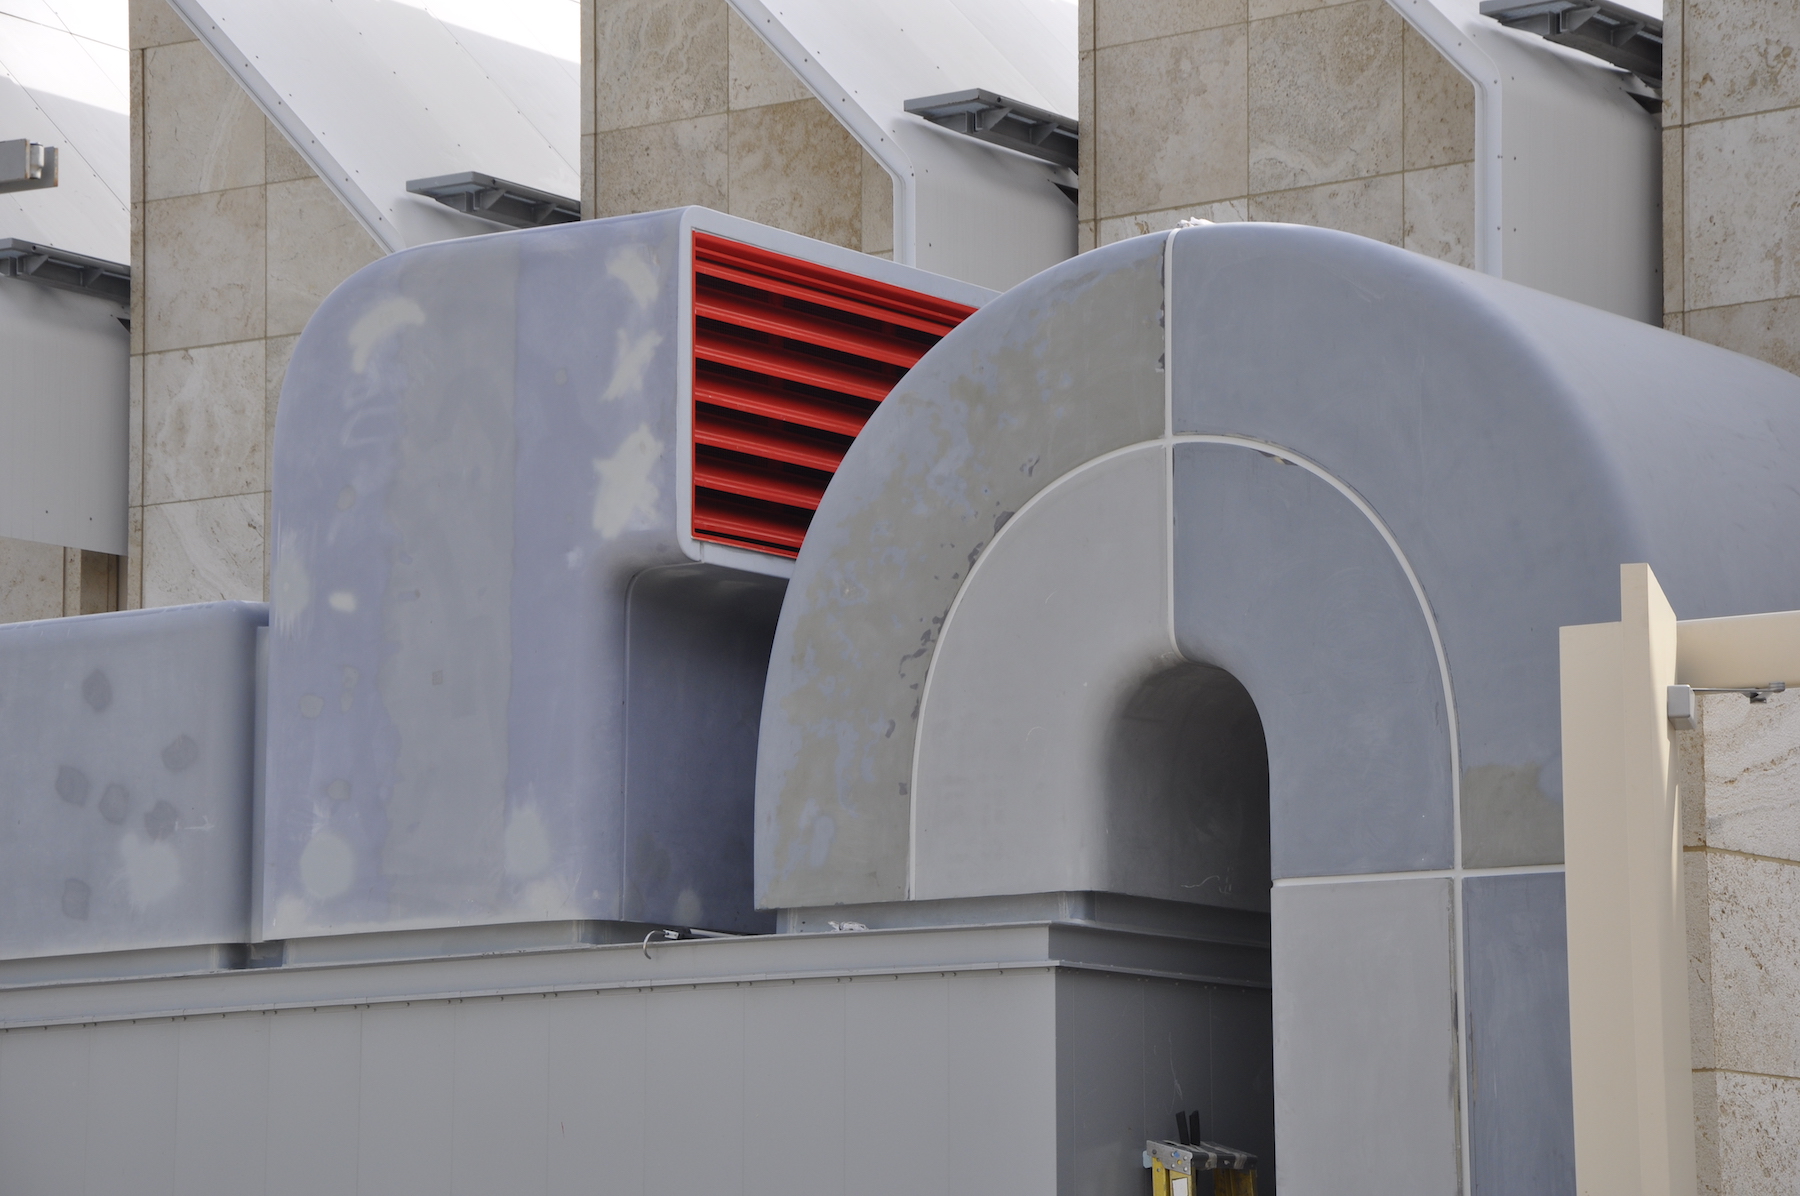 Mechanical systems - air ducts at LACMA Resnik Pavilion